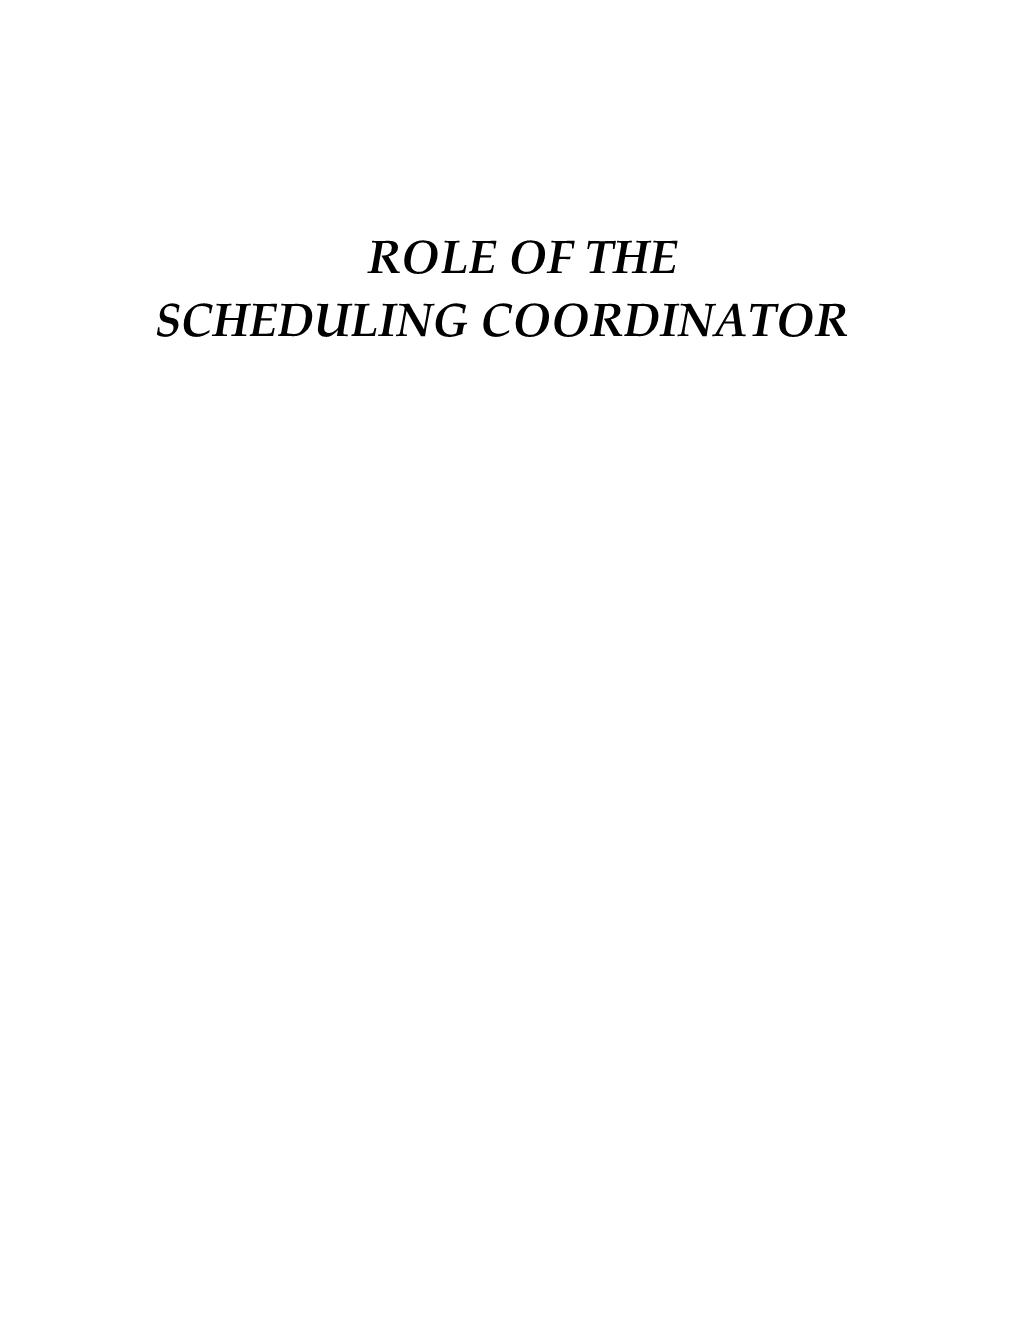 Role of the Appointment Coordinator